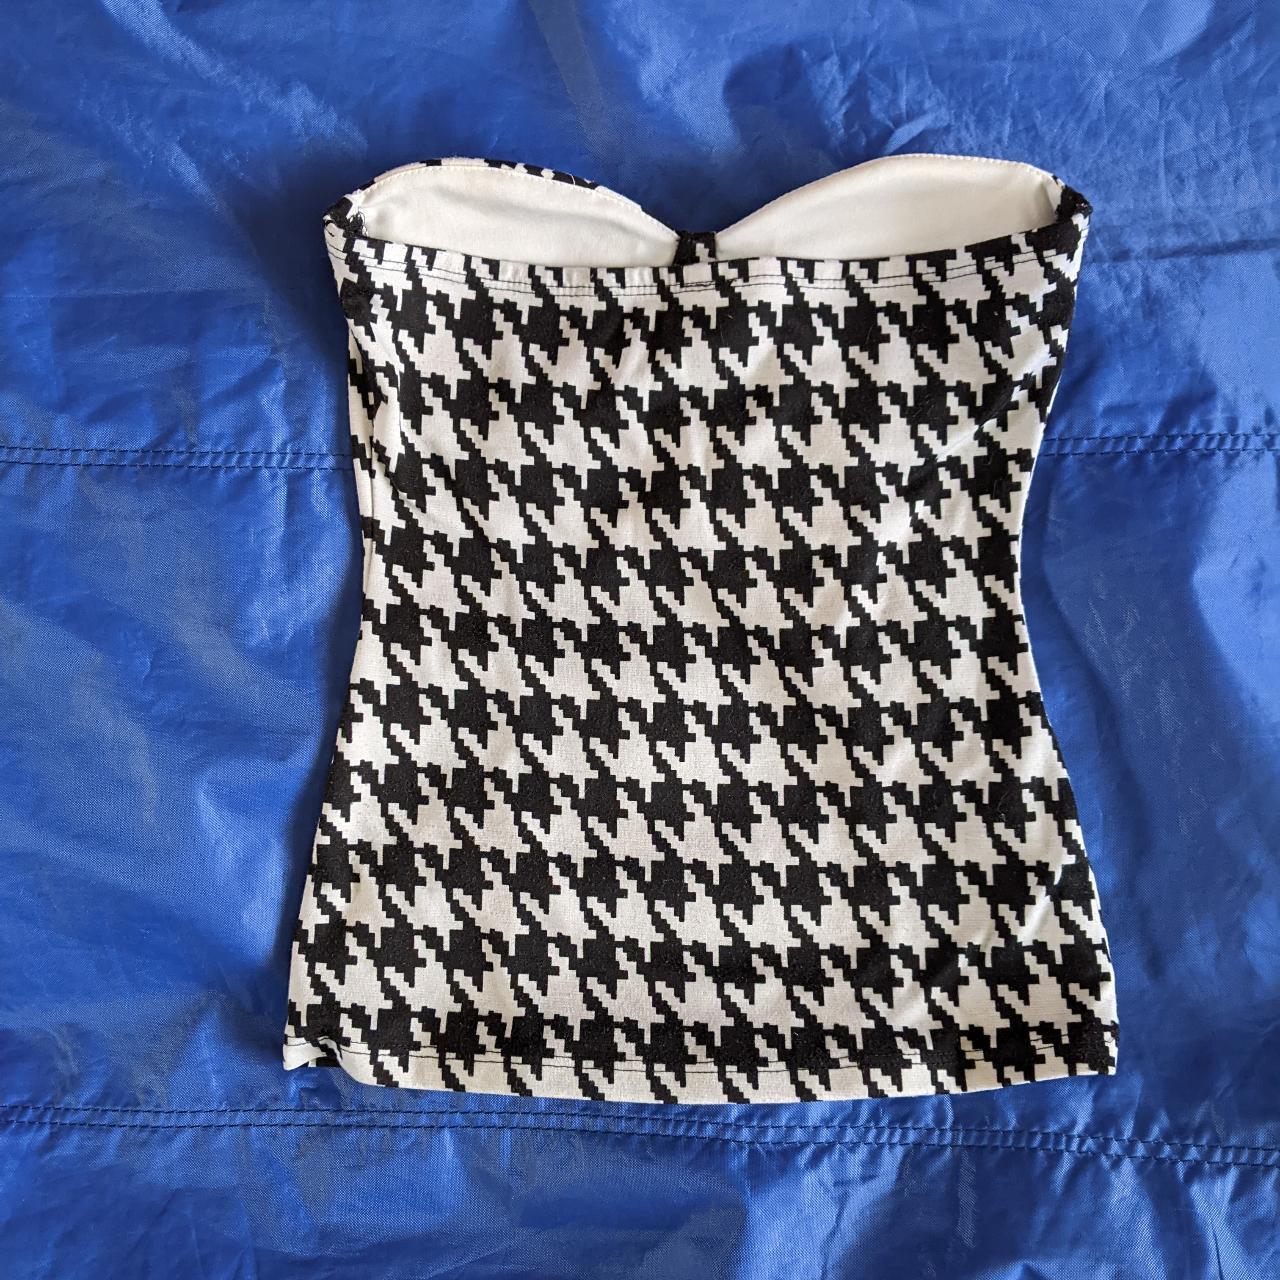 Product Image 3 - Houndstooth bustier

Stays up nicely with